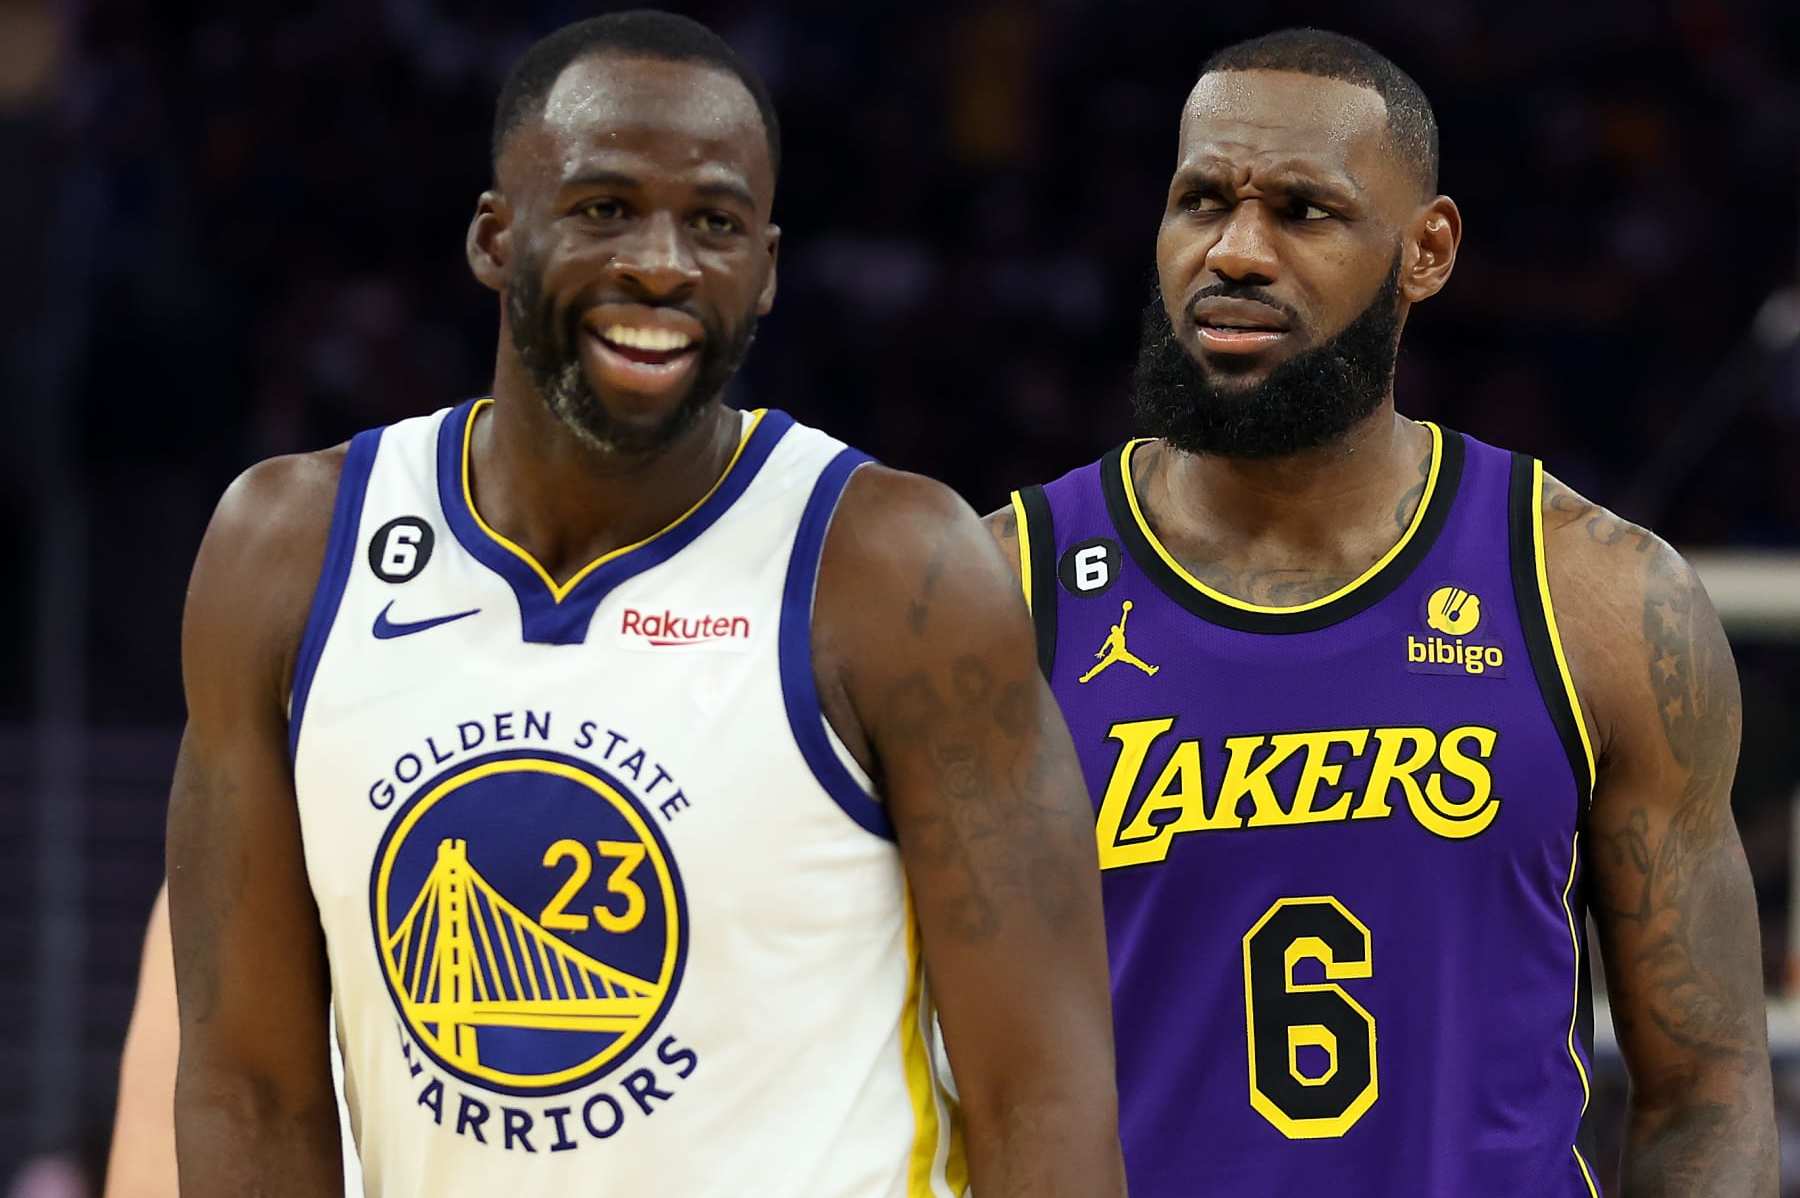 NBA playoffs: LeBron James' 1-man show, aided by Grizzlies' silly decision-making, pushes Lakers to 3-1 lead